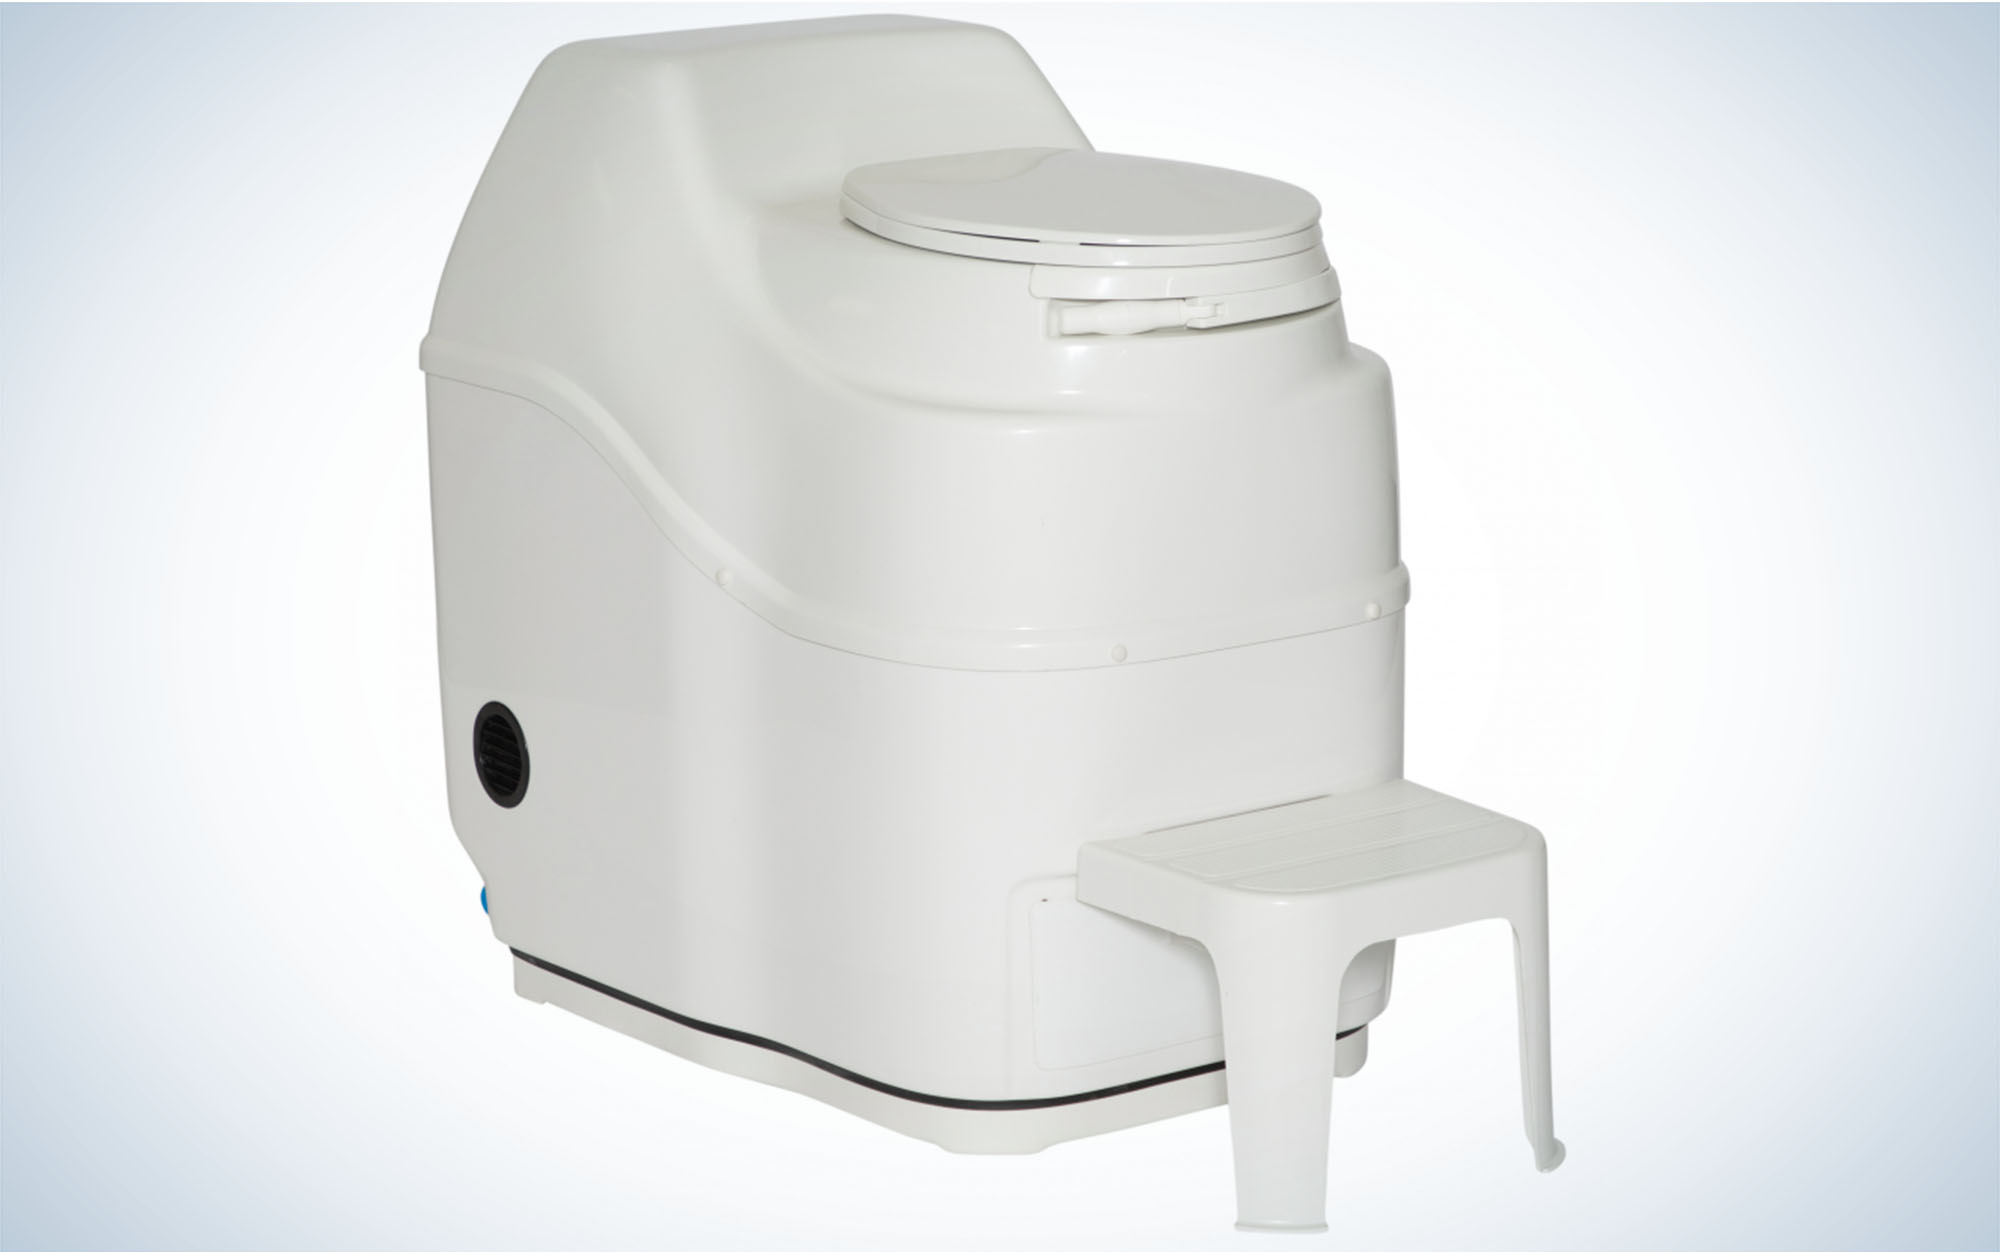 The SunMar Excel Composting Toilet is best for home-use.